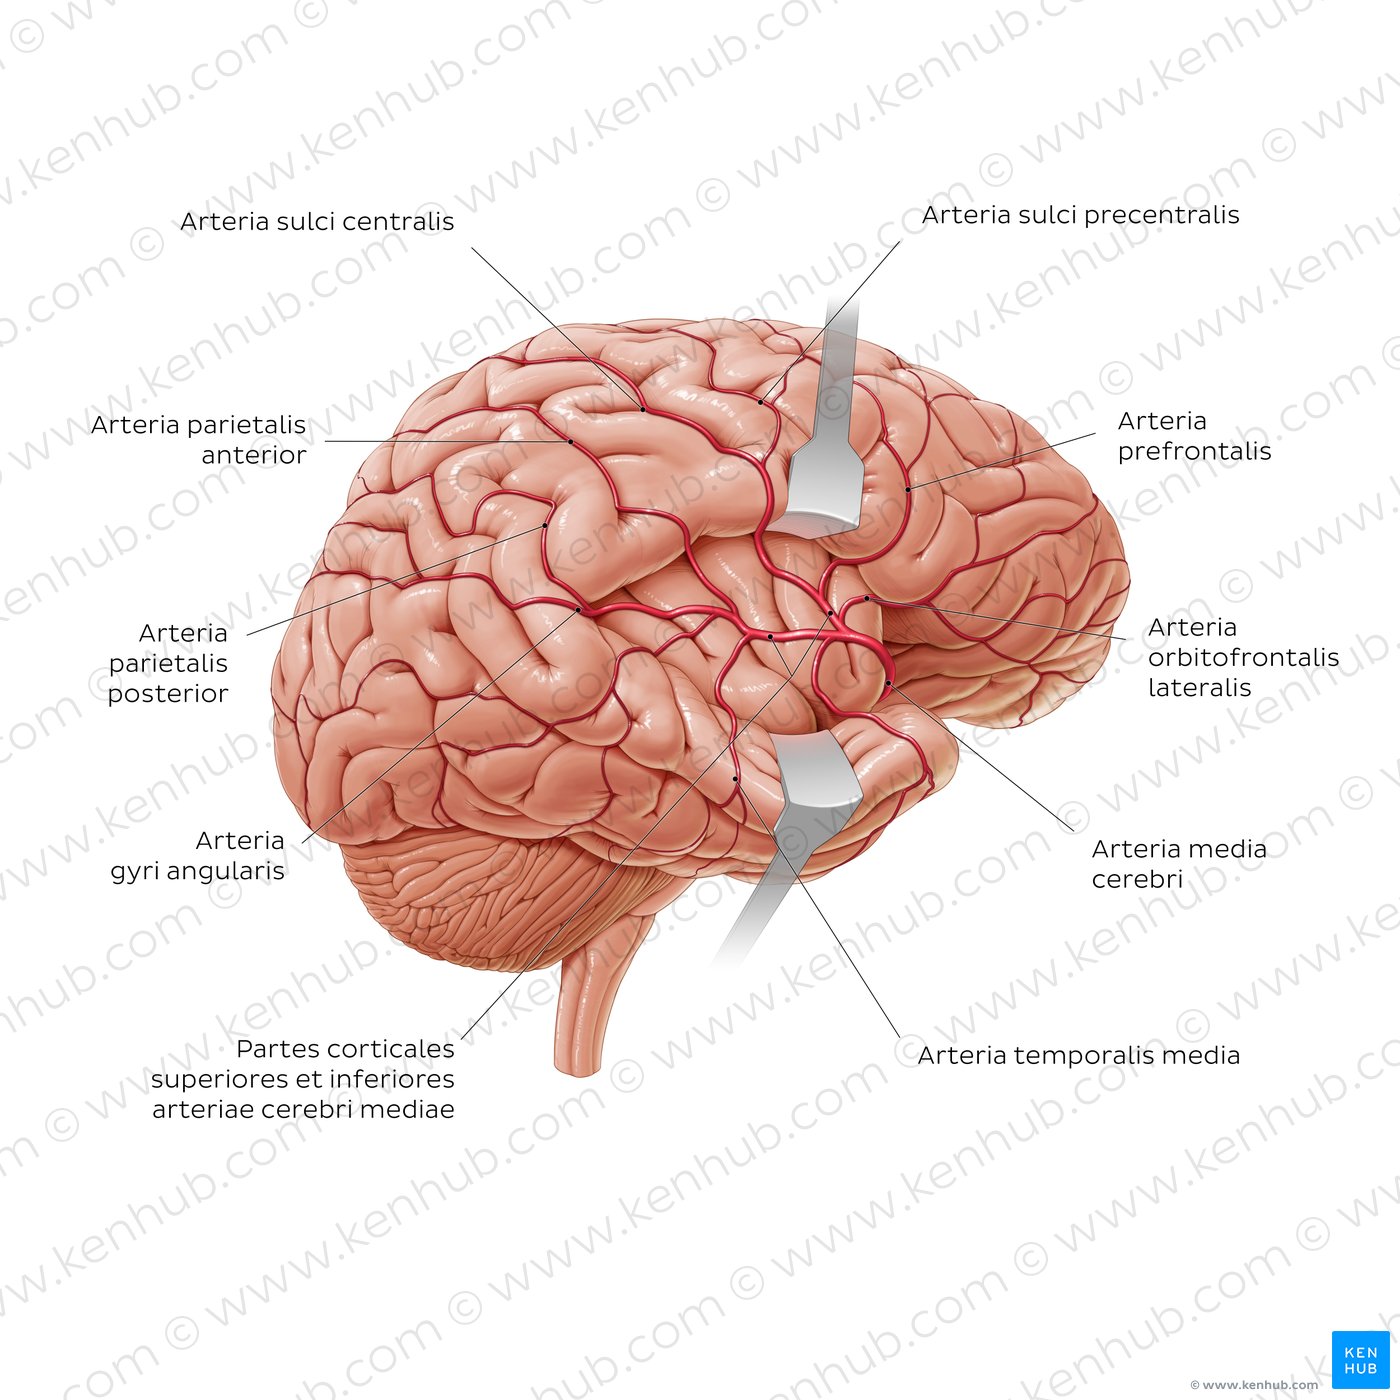 Branches of the middle cerebral artery (diagram)